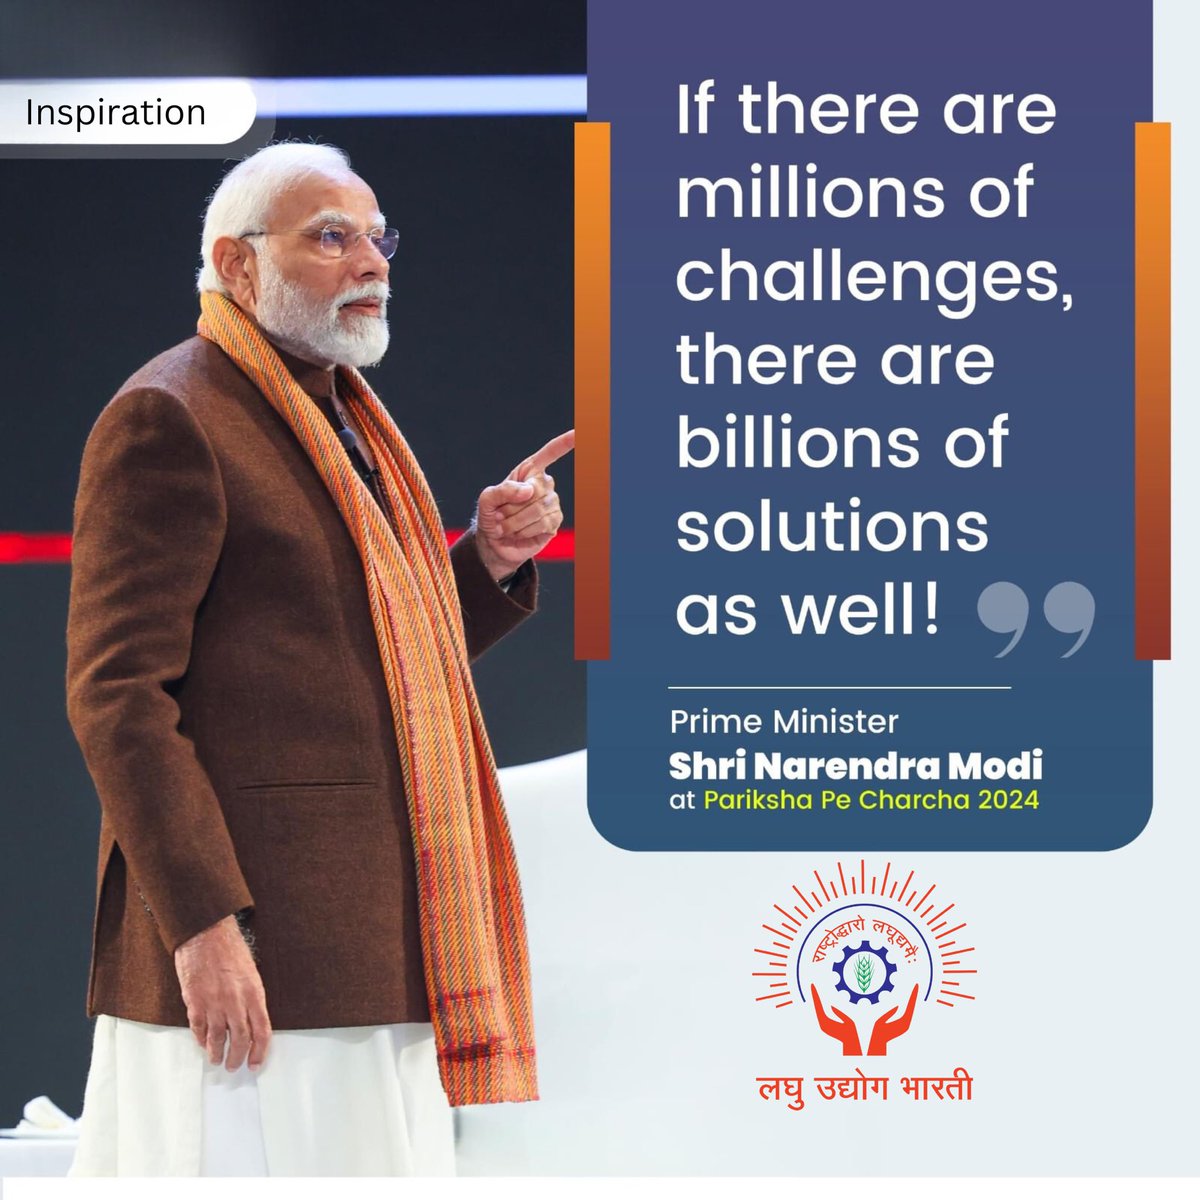 Facing millions of challenges, yet our Prime Minister @narendramodi ji reminds us that there are billions of solutions available. A perspective that fuels hope and resilience. 🌐 #NarendraModi #SolutionsOverChallenges @lubindia